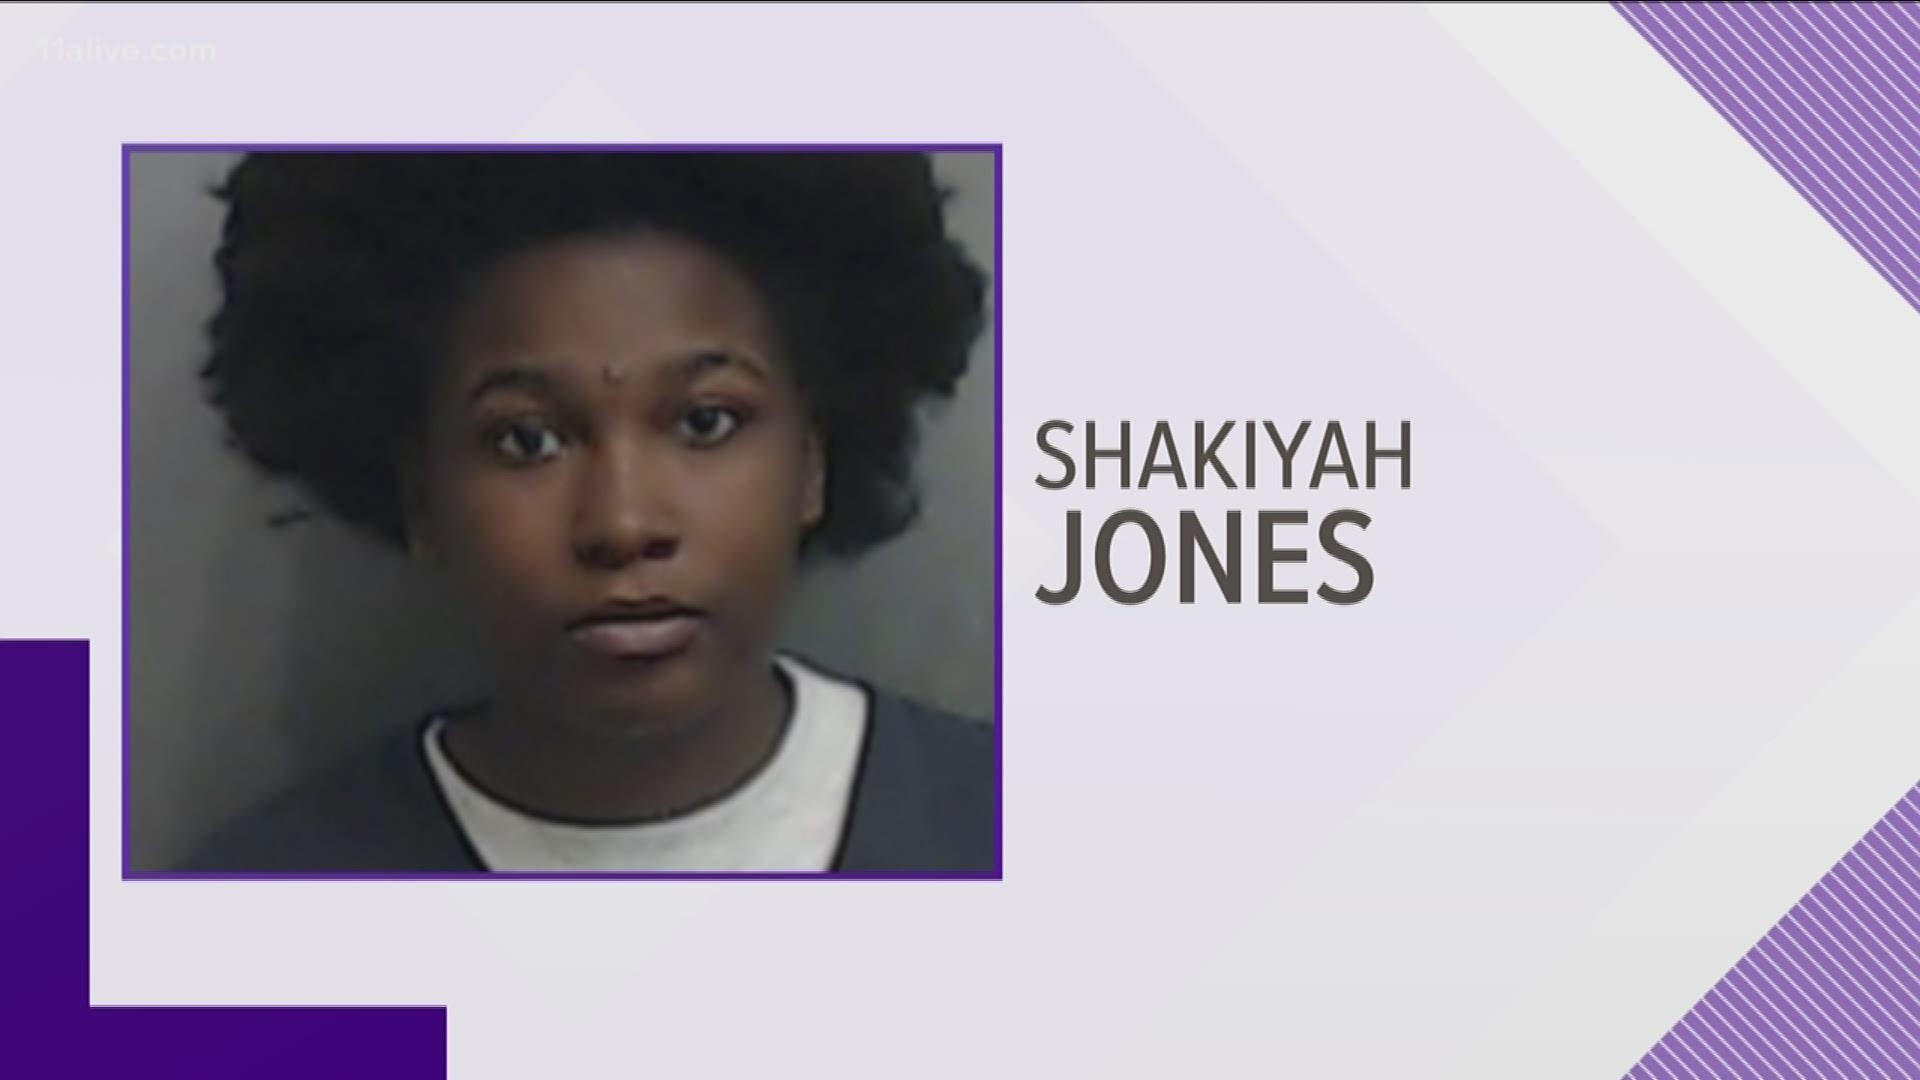 Shakiyah Jones was arrested Tuesday and charged with felony murder in connection with the incident that killed Renae Edwards-Alexander, a Navy veteran who was there